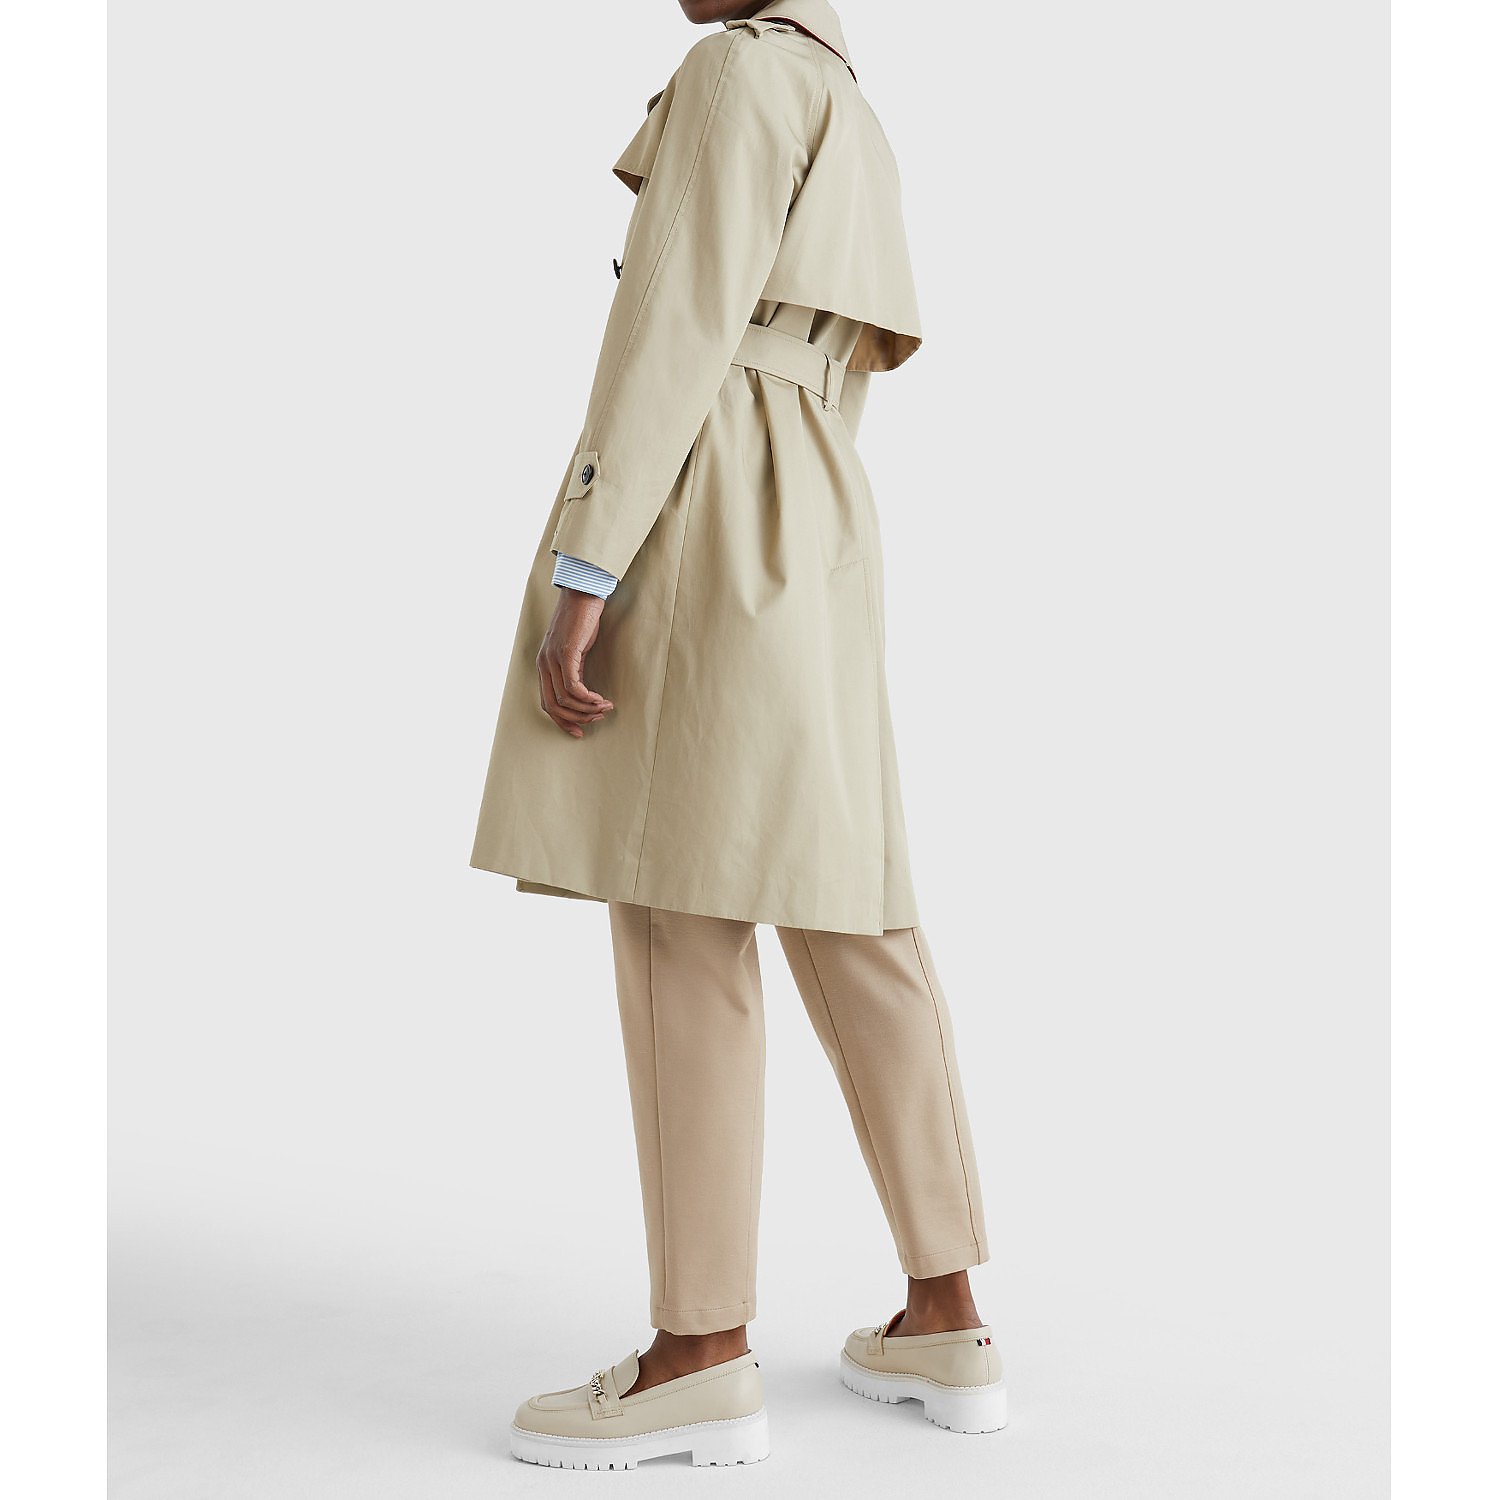 Tommy Hilfiger Organic Cotton Trench Coat